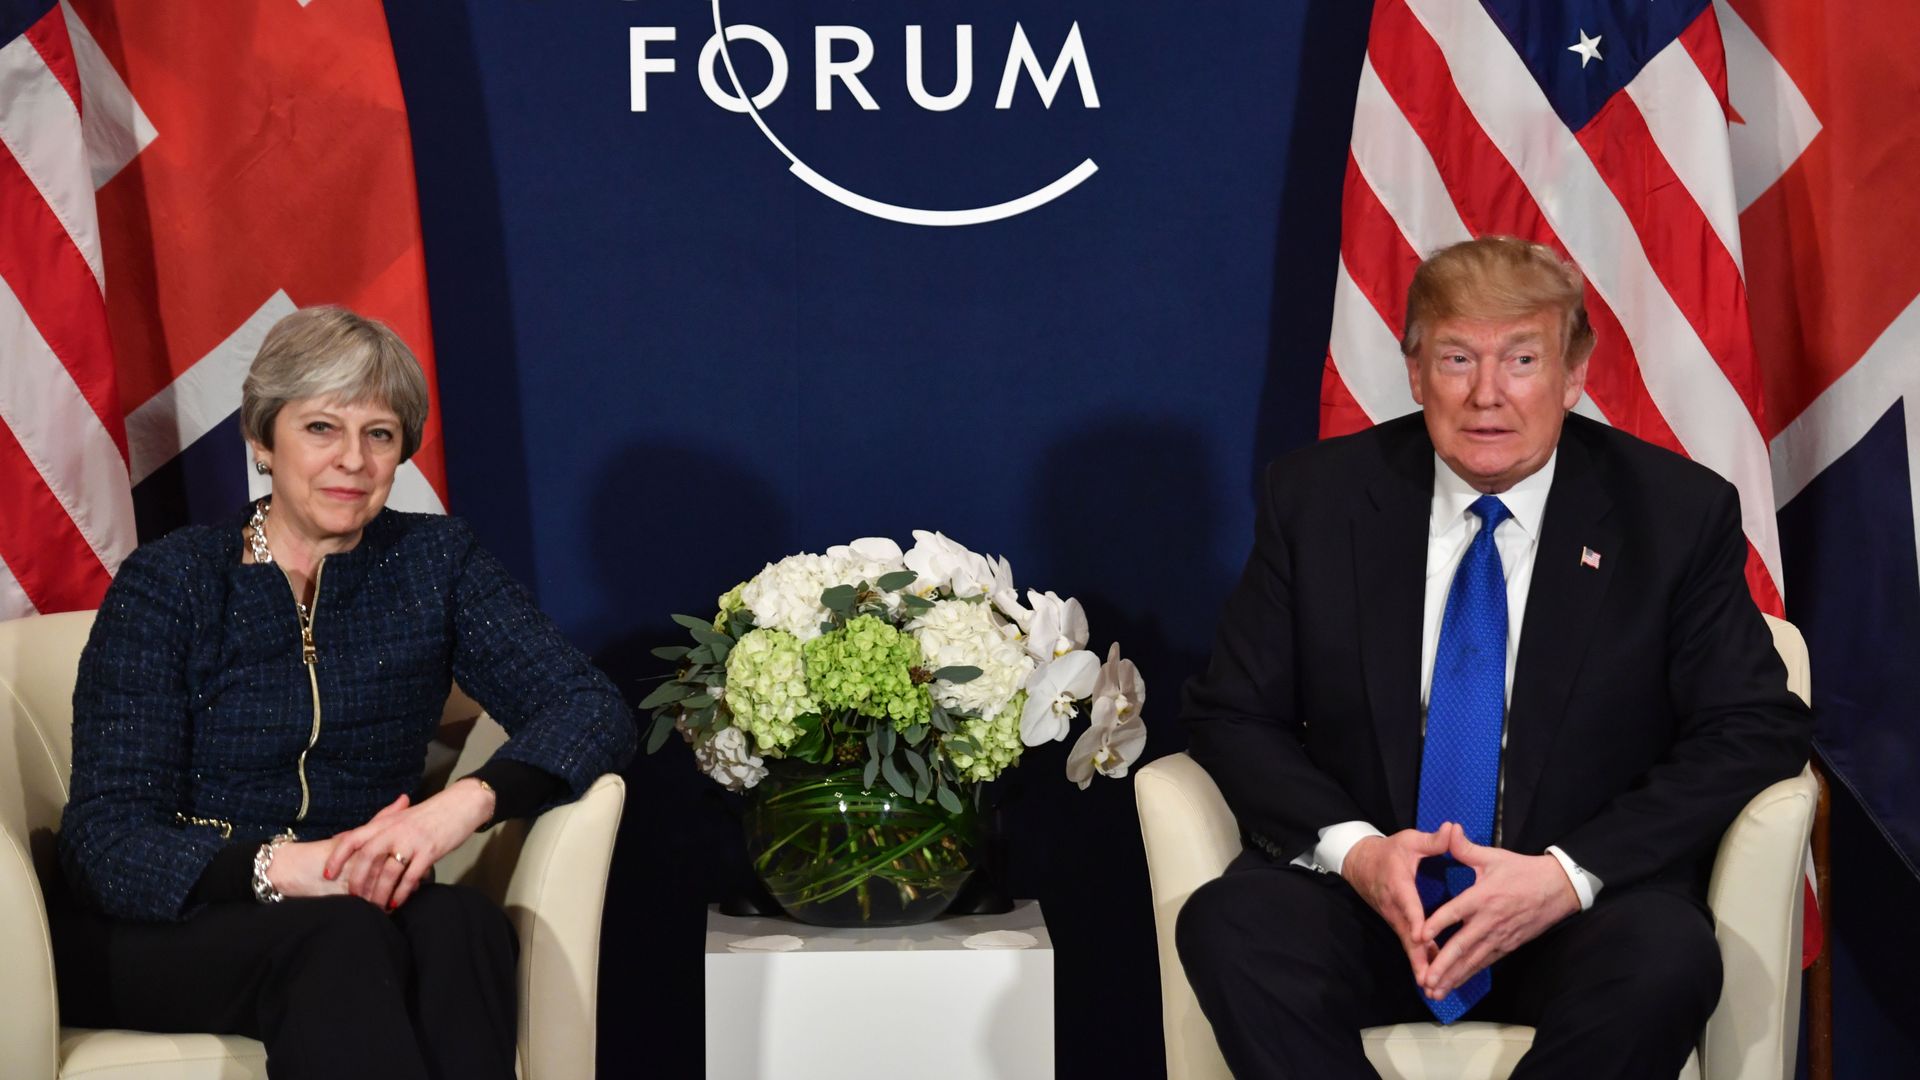 Theresa May and Donald Trump meet at the World Economic Forum in January